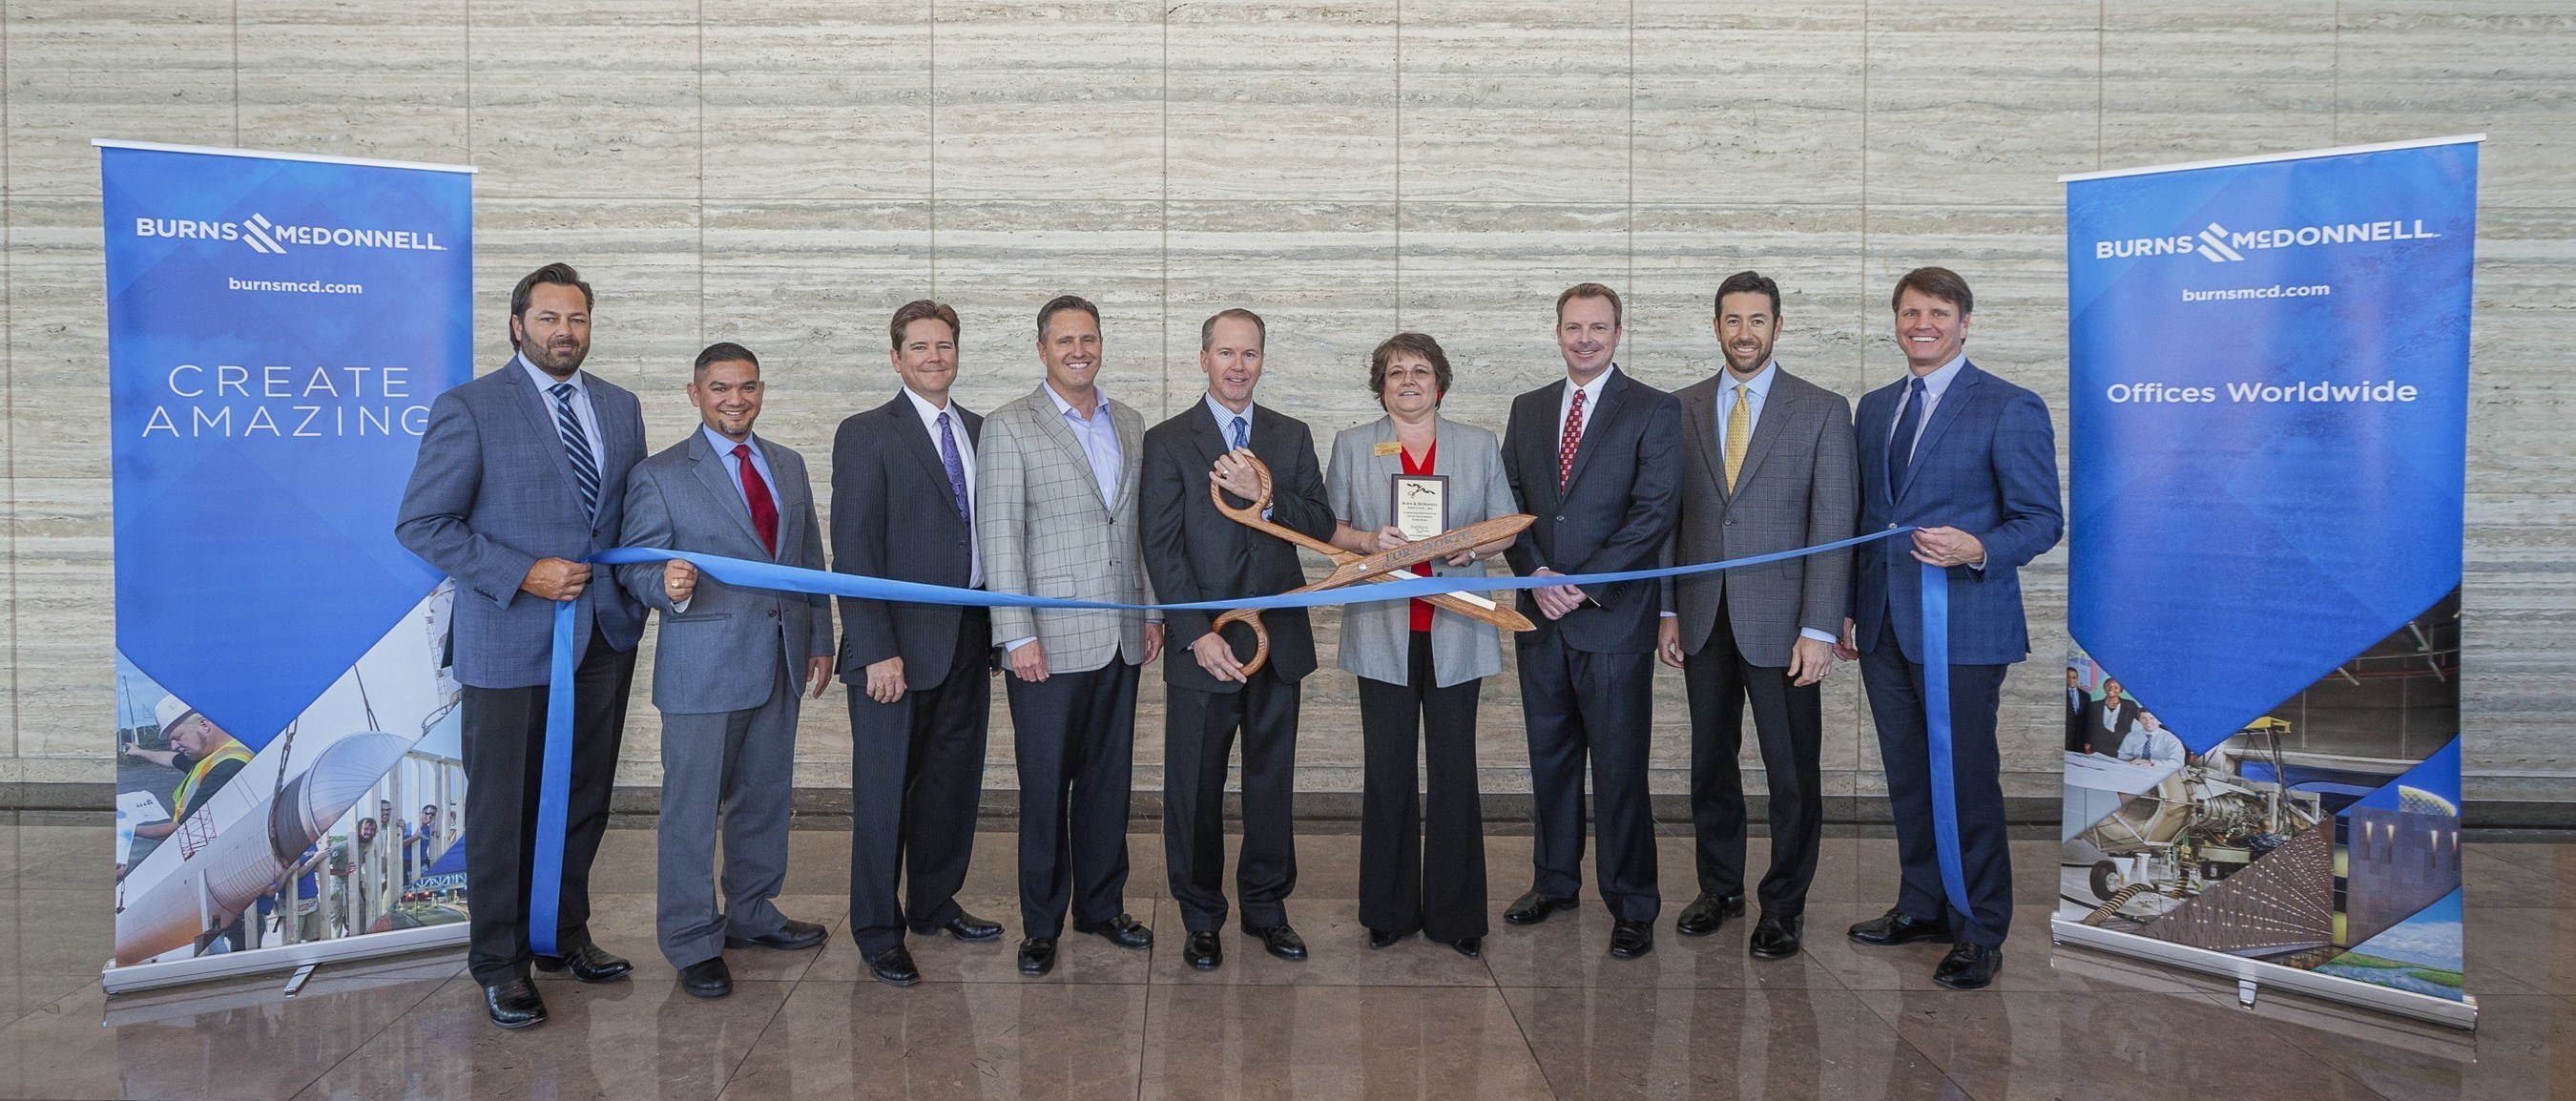 Burns & McDonnell celebrates the opening of its newest office in Fort Worth with a ribbon cutting with the Fort Worth Chamber of Commerce. Pictured left to right: Rod D'Spain, Gus Rodriguez, Chris Williams, Paul Fischer, Scott Clark, Pepper Sims, Kyle Lambert, John Schwartz and Tony Kimmey.